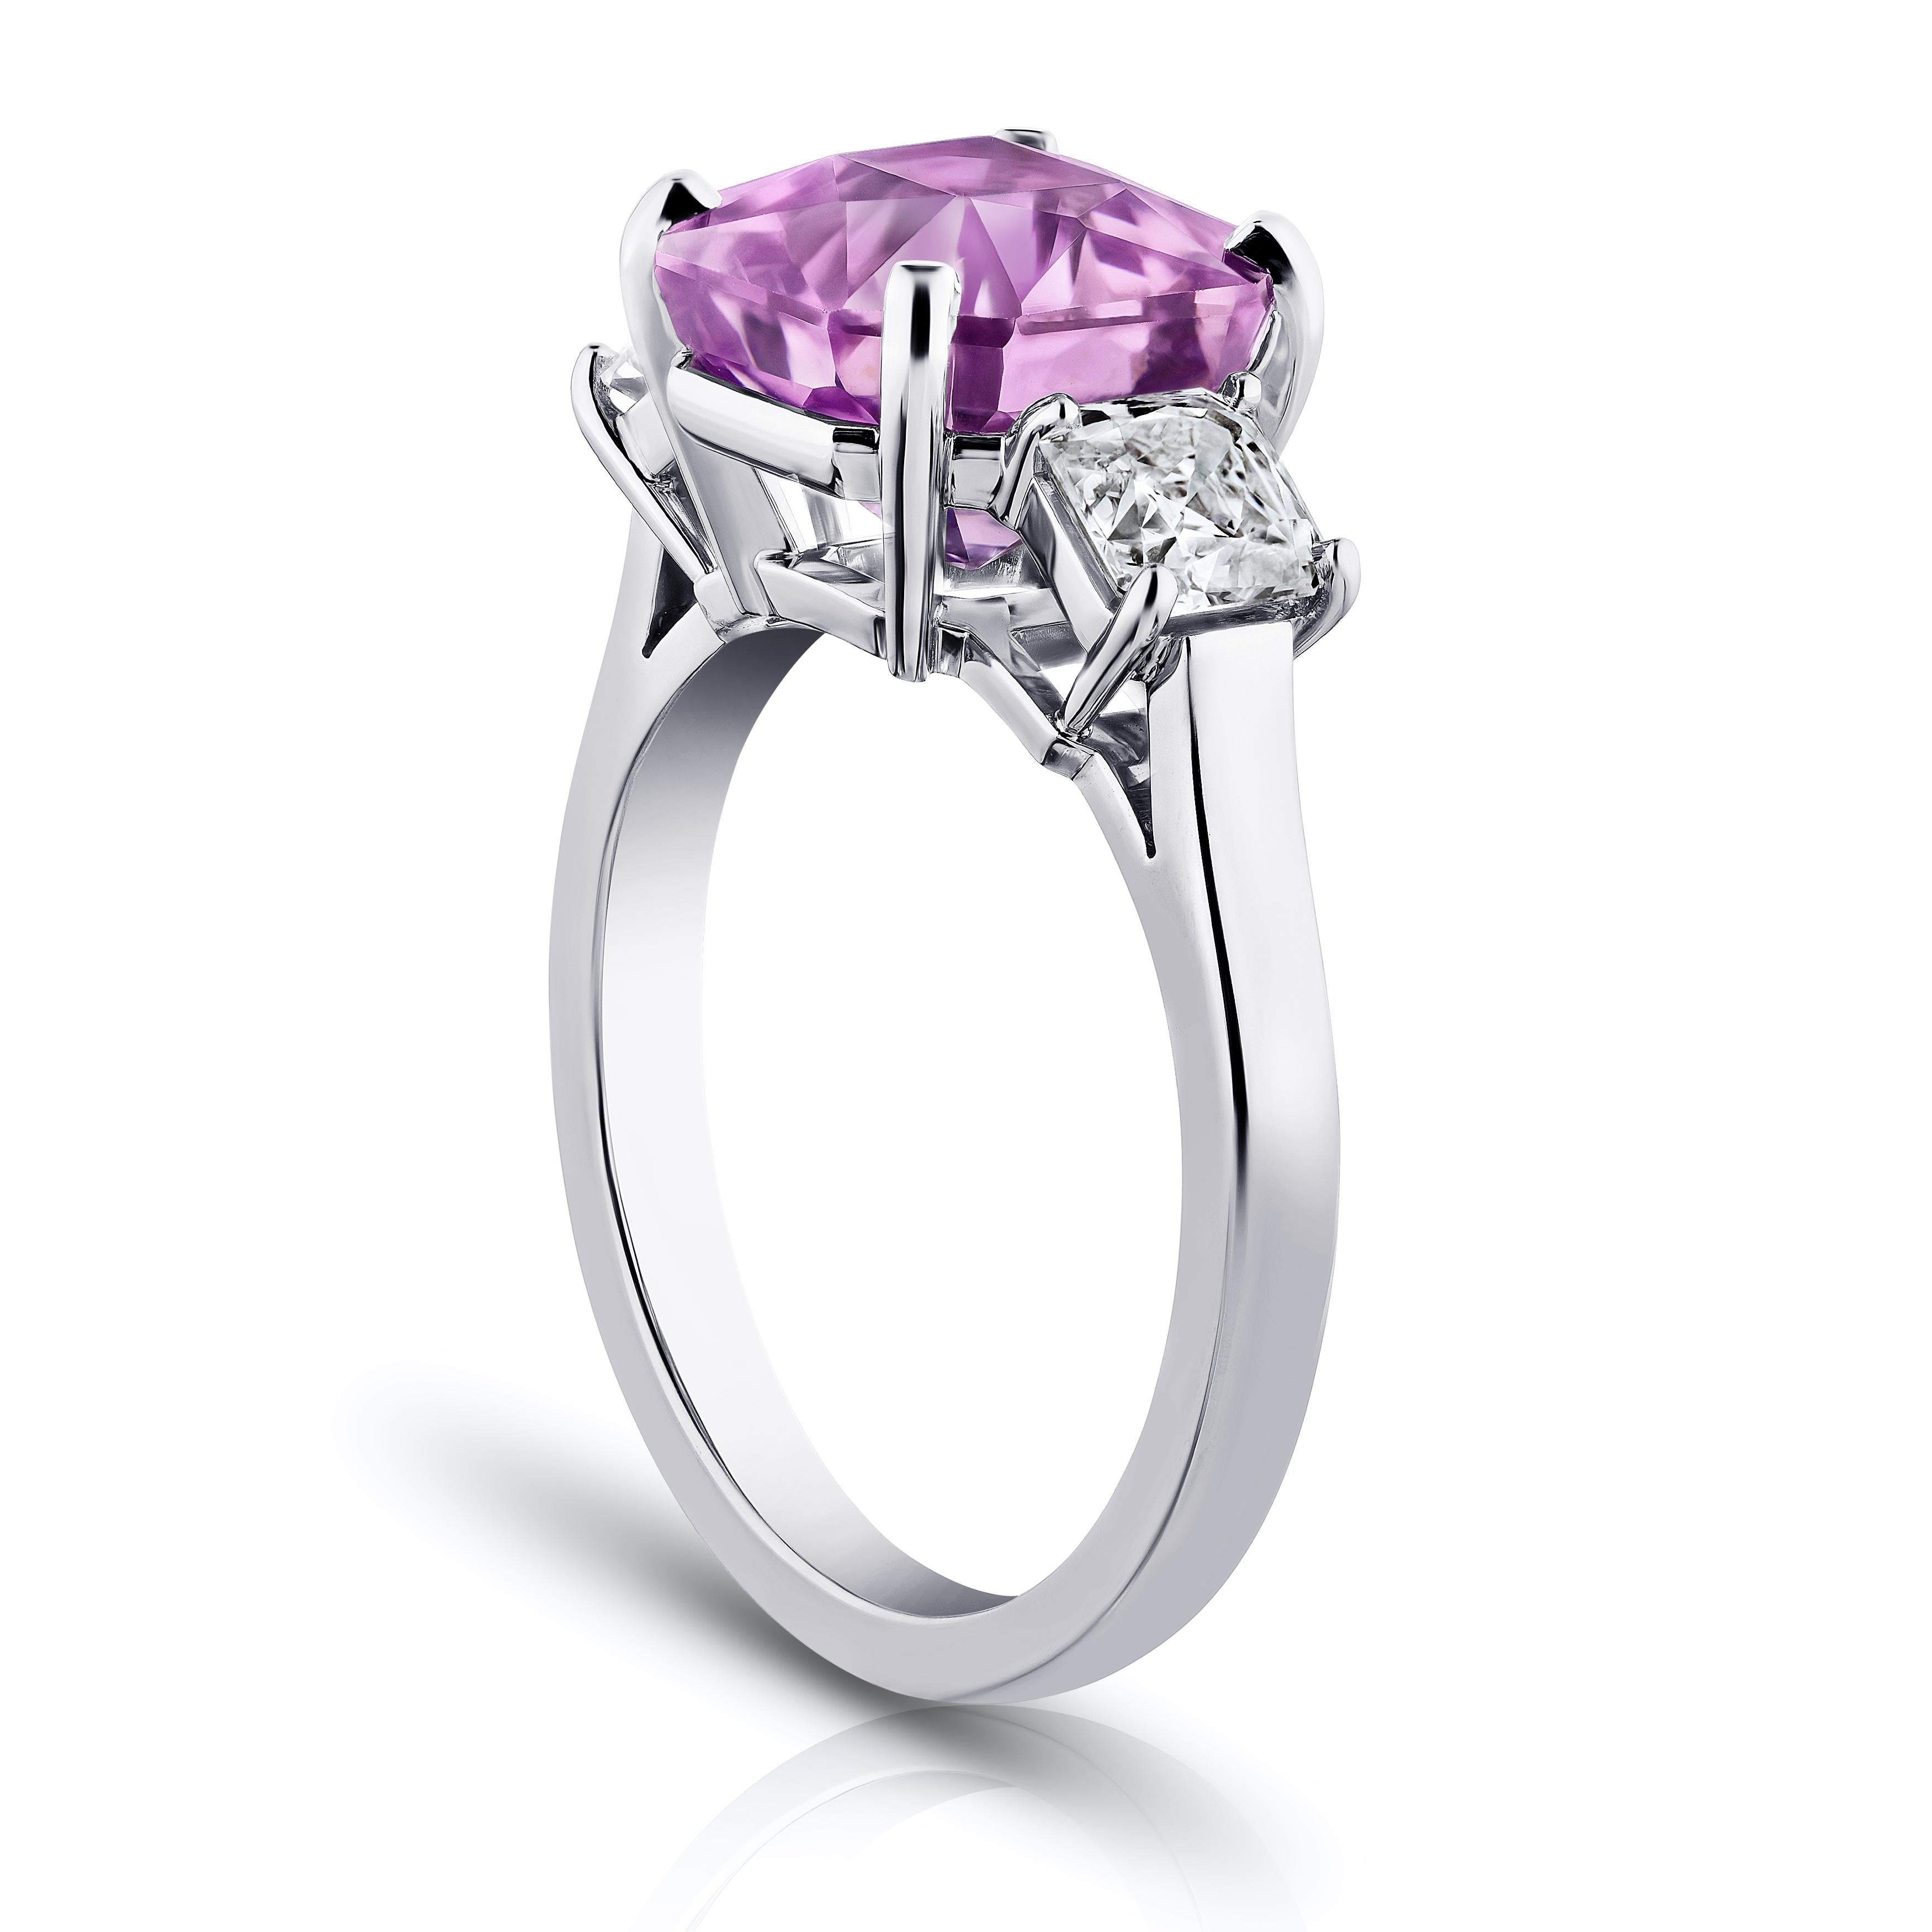 5.96 carat radiant cut pink sapphire with antique square diamonds 1.00 carats set in a platinum Ring. Size 7